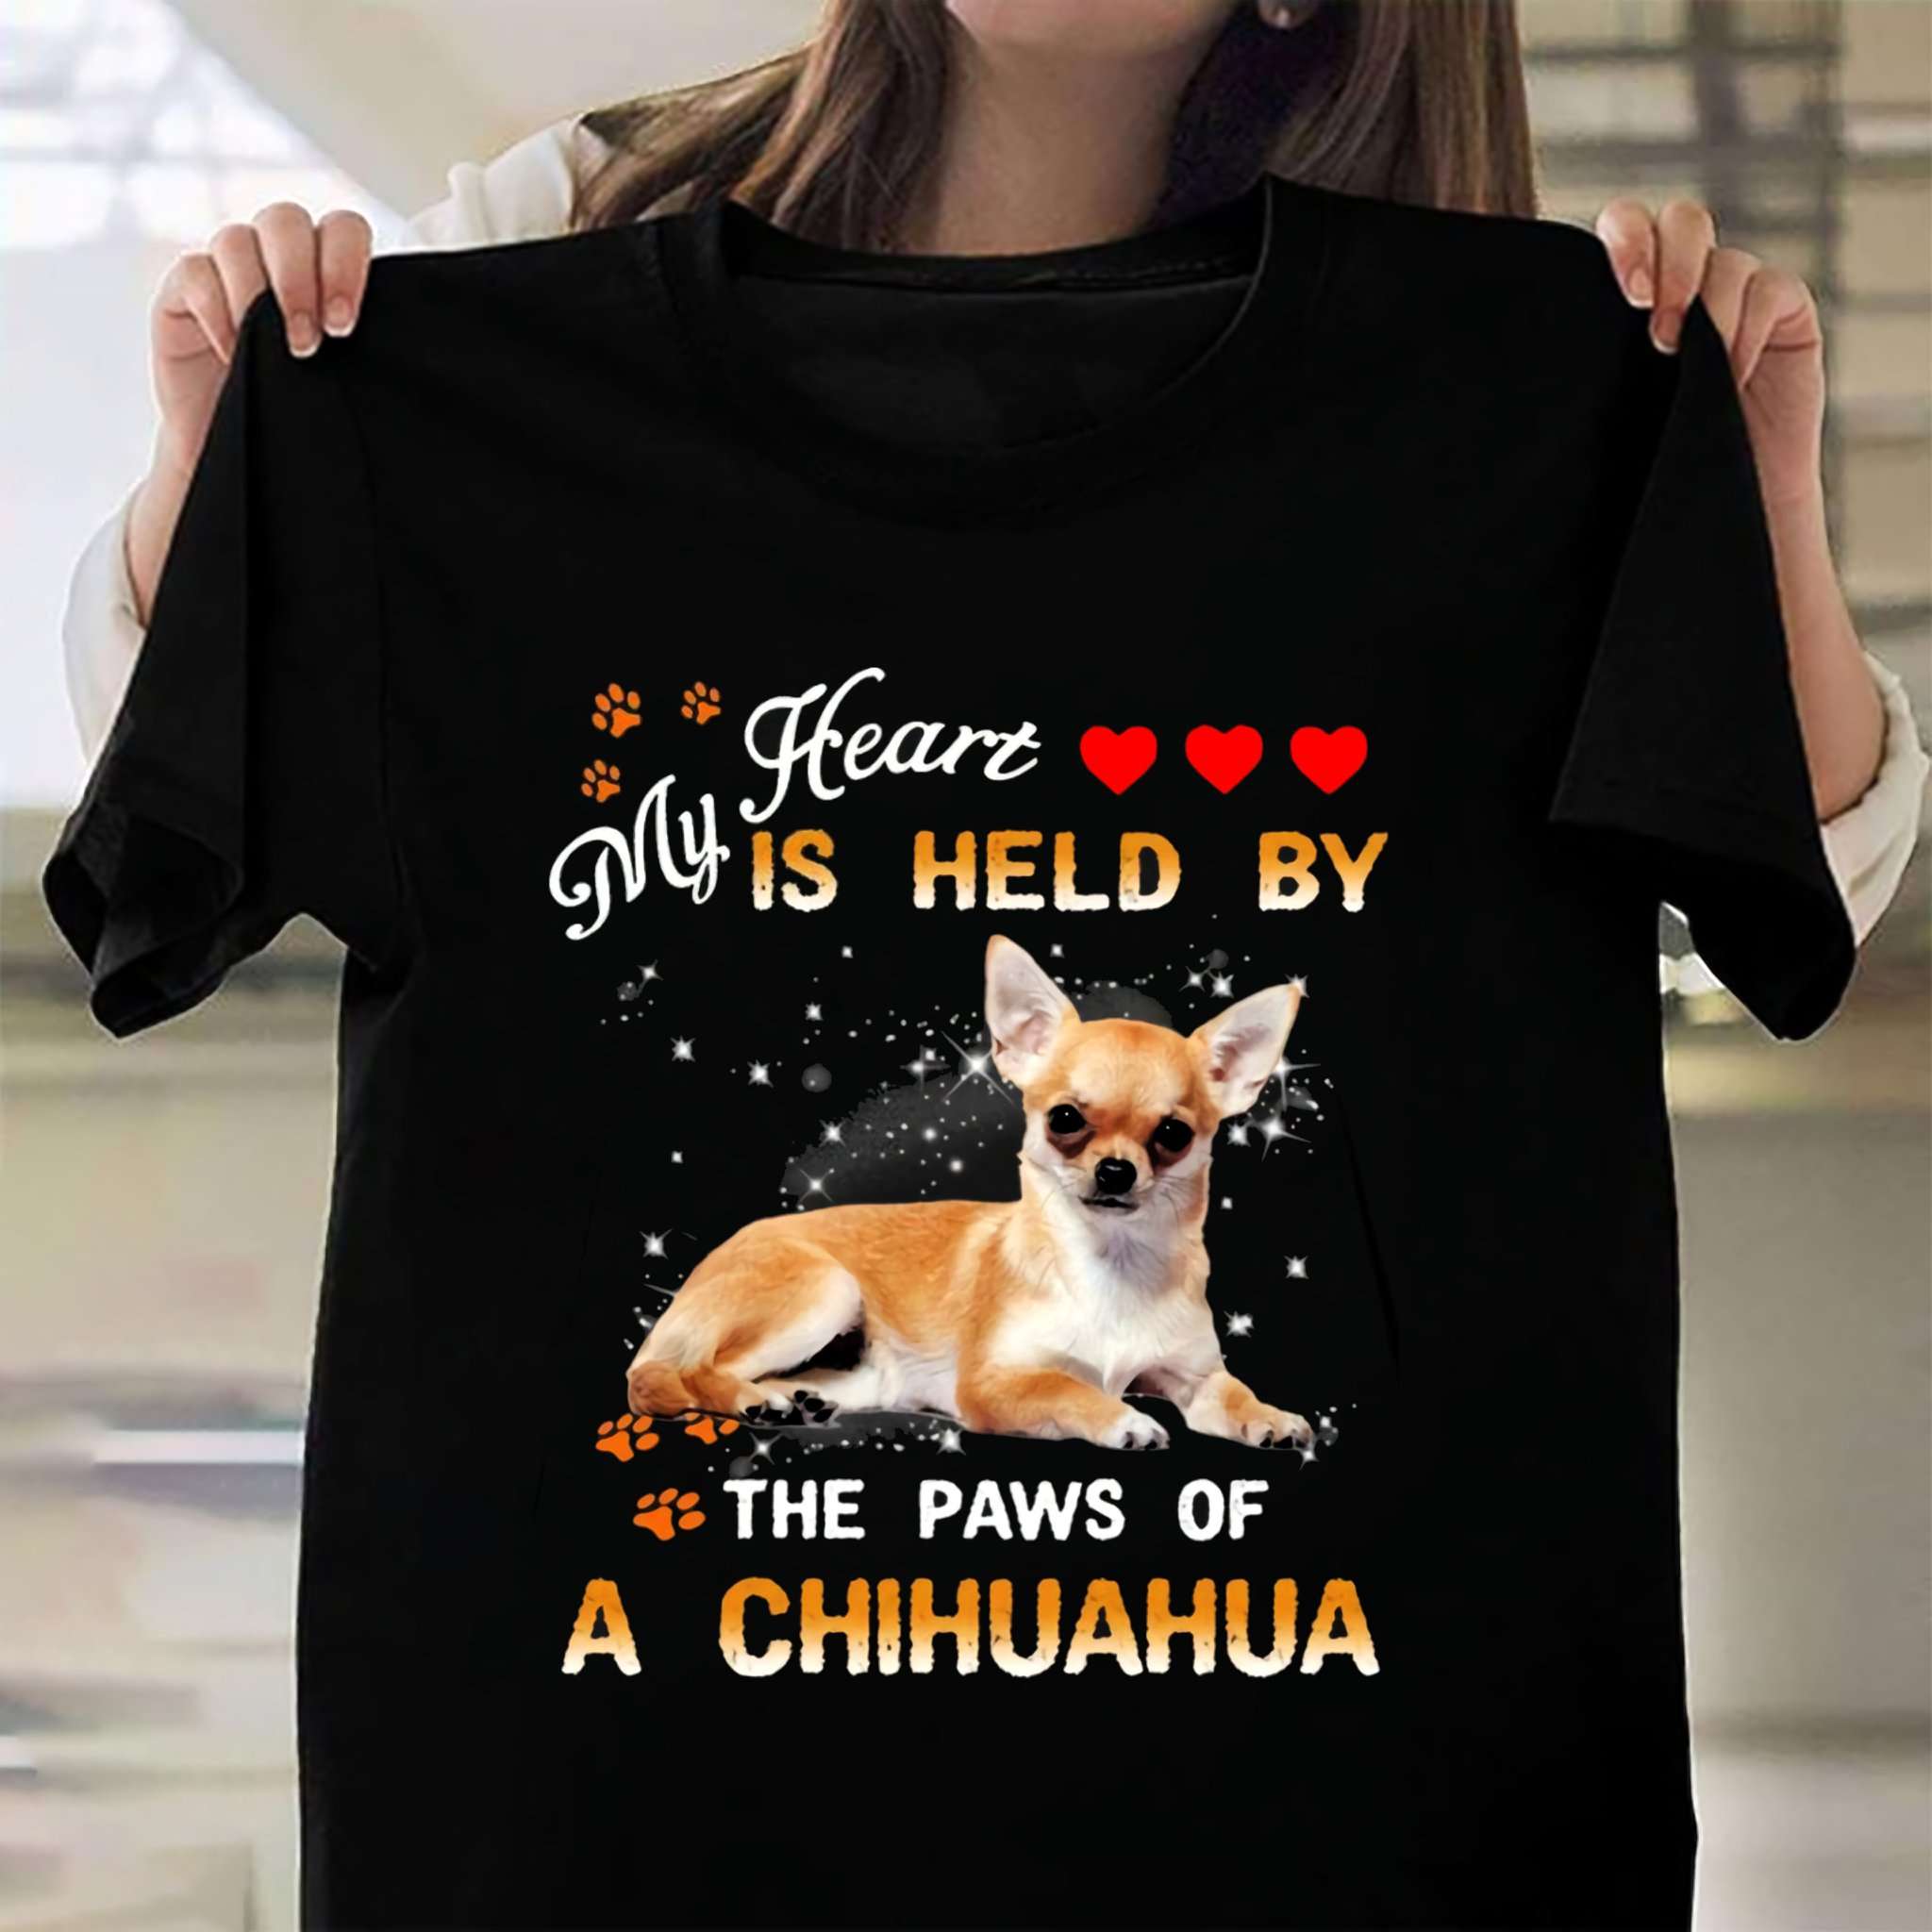 My heart is held by the paws of a Chihuahua - American loves Chihuahua, T-shirt for dog lover